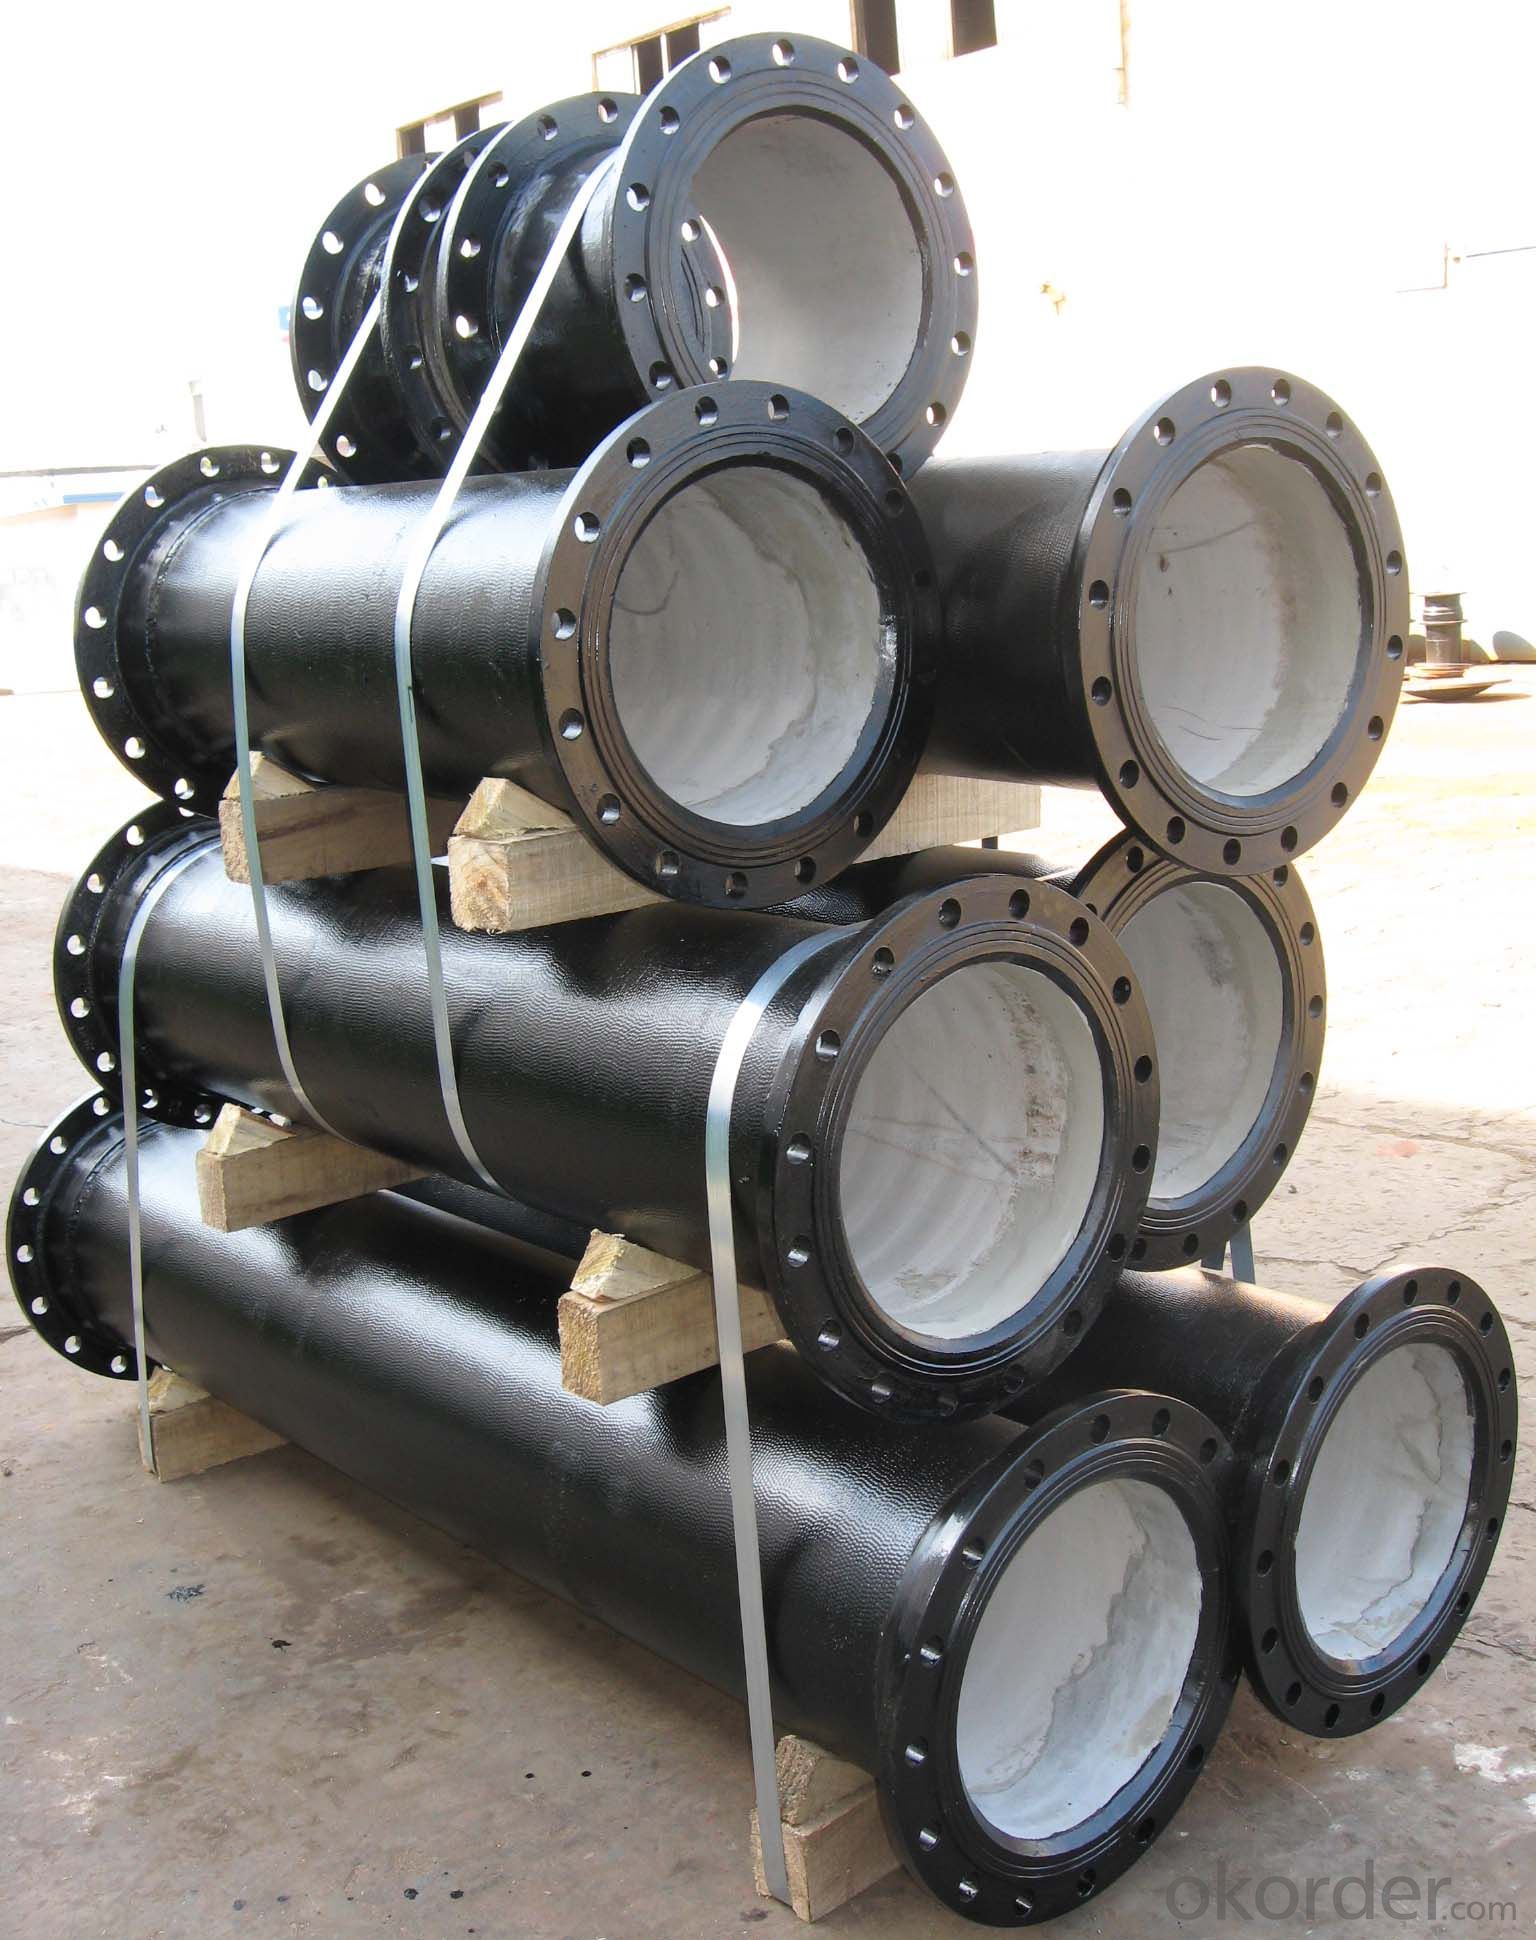 Ductile Iron Pipe ISO2531 C CLASS DN1500 realtime quotes, lastsale